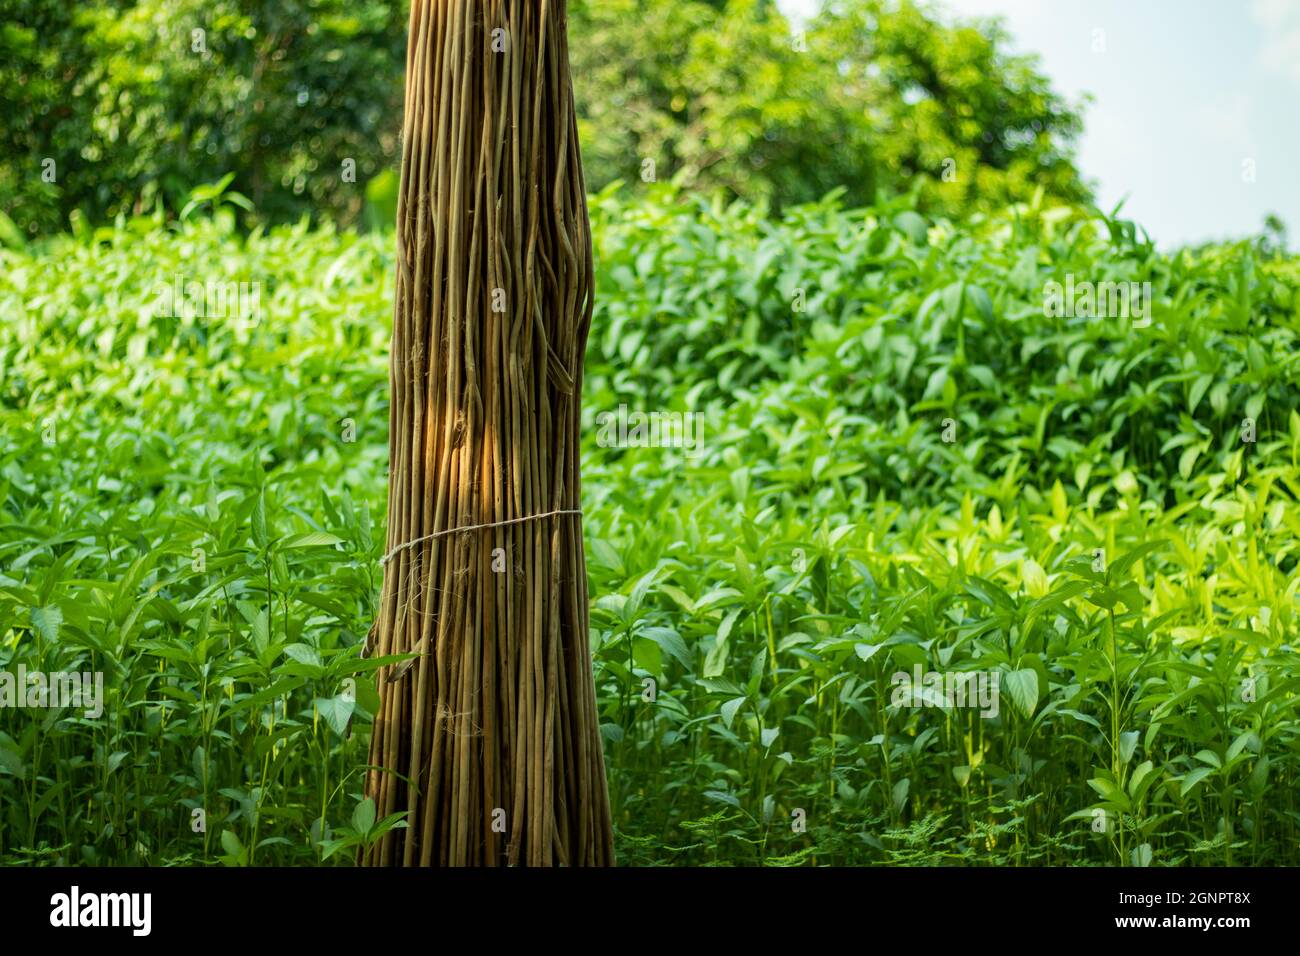 Jute Stick, in the preparation of a variety of boards, usable purpose such as in furniture. Dry and green plant together Stock Photo